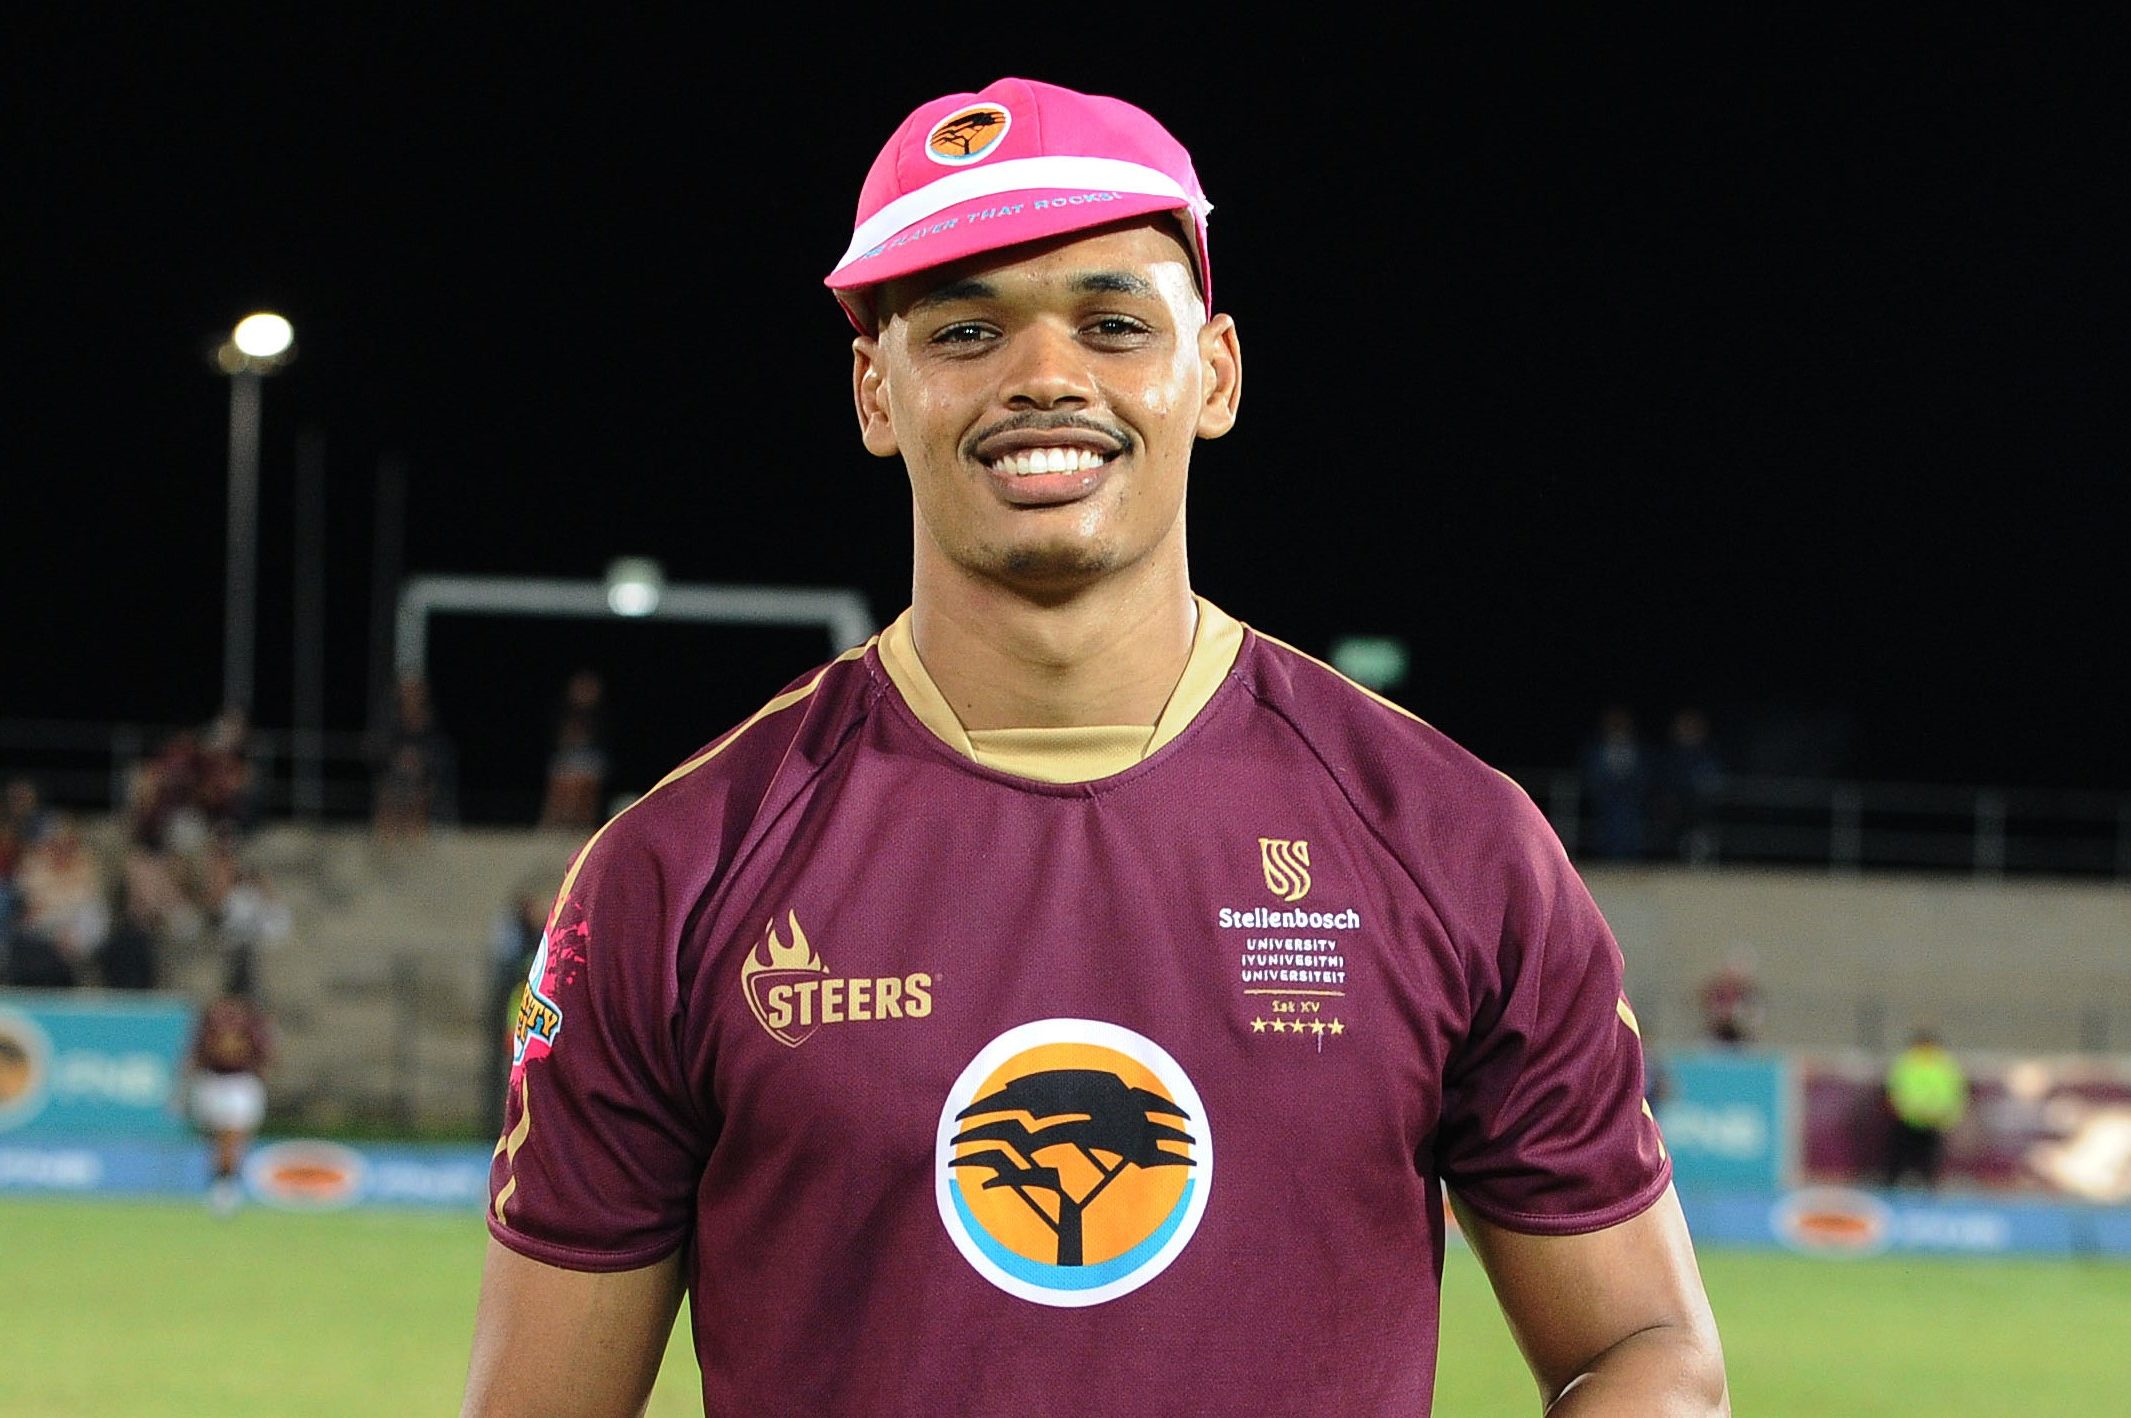 Nevaldo Fleurs of Maties during the 2022 Varsity Cup round 9 match between the FNB Maties and FNB UWC at the Danie Craven Stadium, Stellenbosch, SOUTH AFRICA